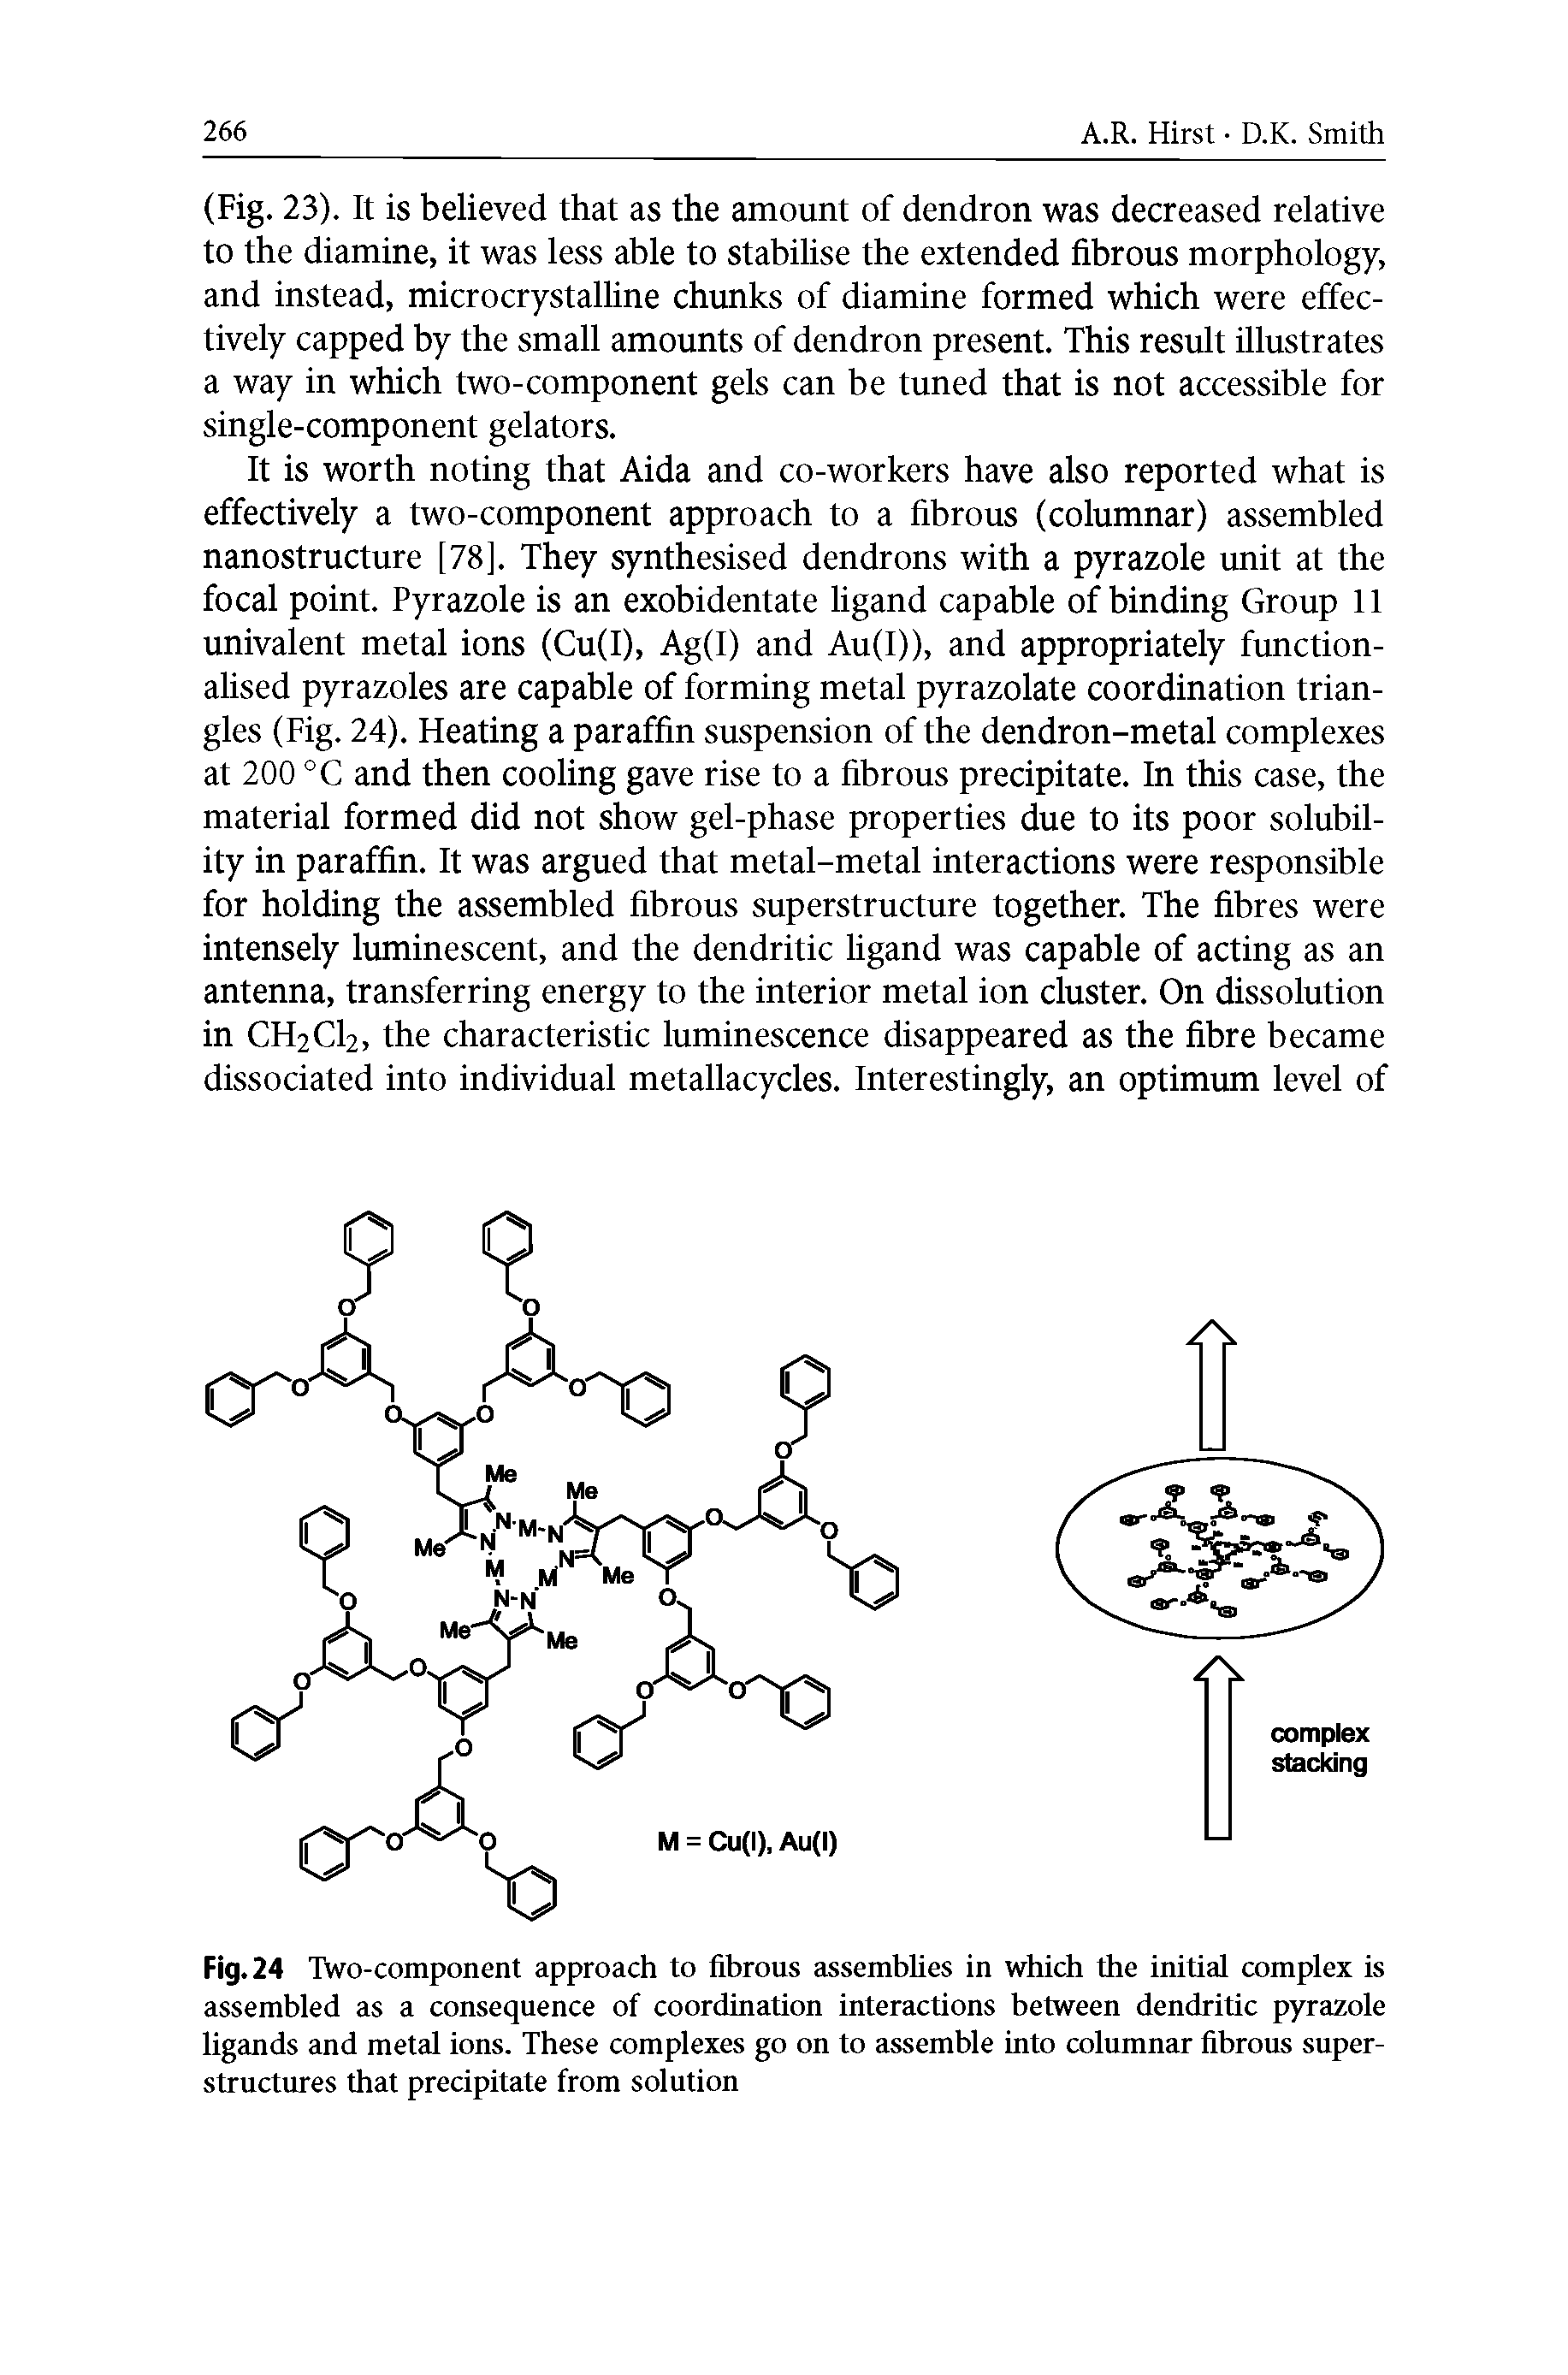 Fig. 24 Two-component approach to fibrous assemblies in which the initial complex is assembled as a consequence of coordination interactions between dendritic pyrazole ligands and metal ions. These complexes go on to assemble into columnar fibrous superstructures that precipitate from solution...